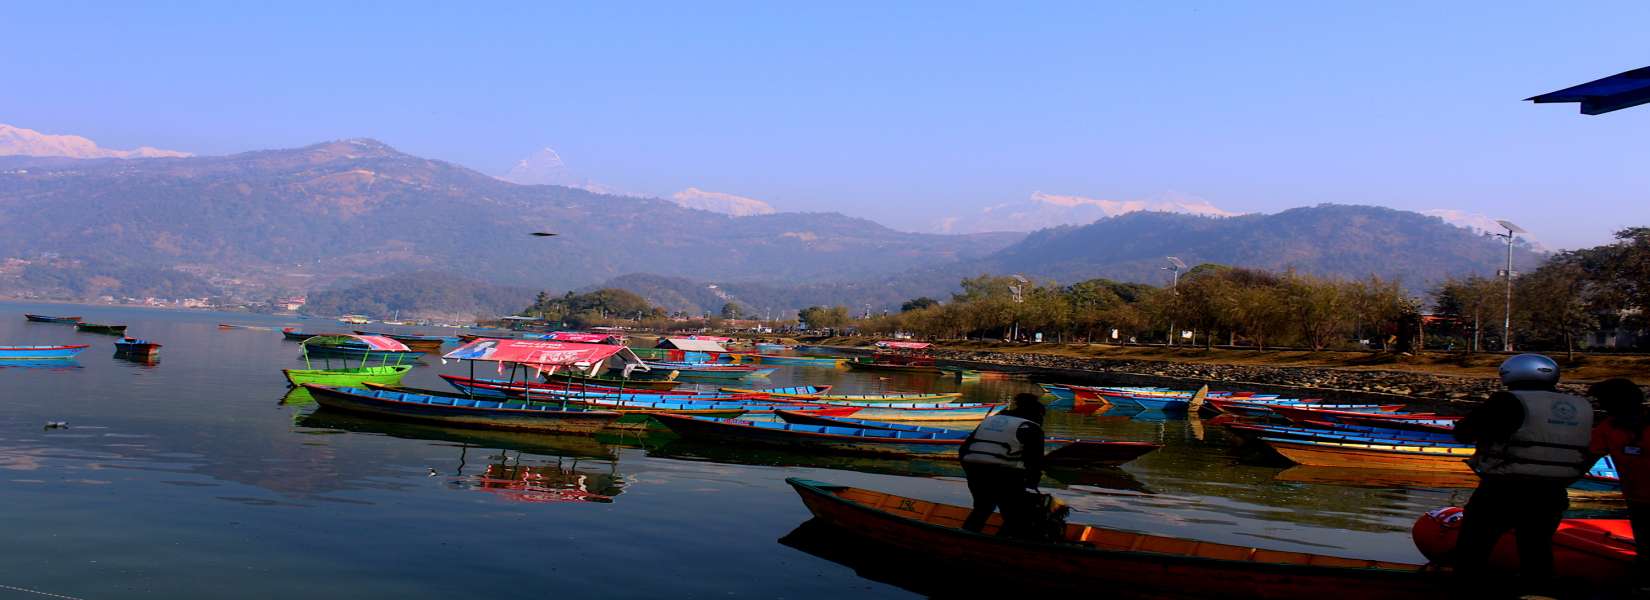 Best Place to Visit in Pokhara